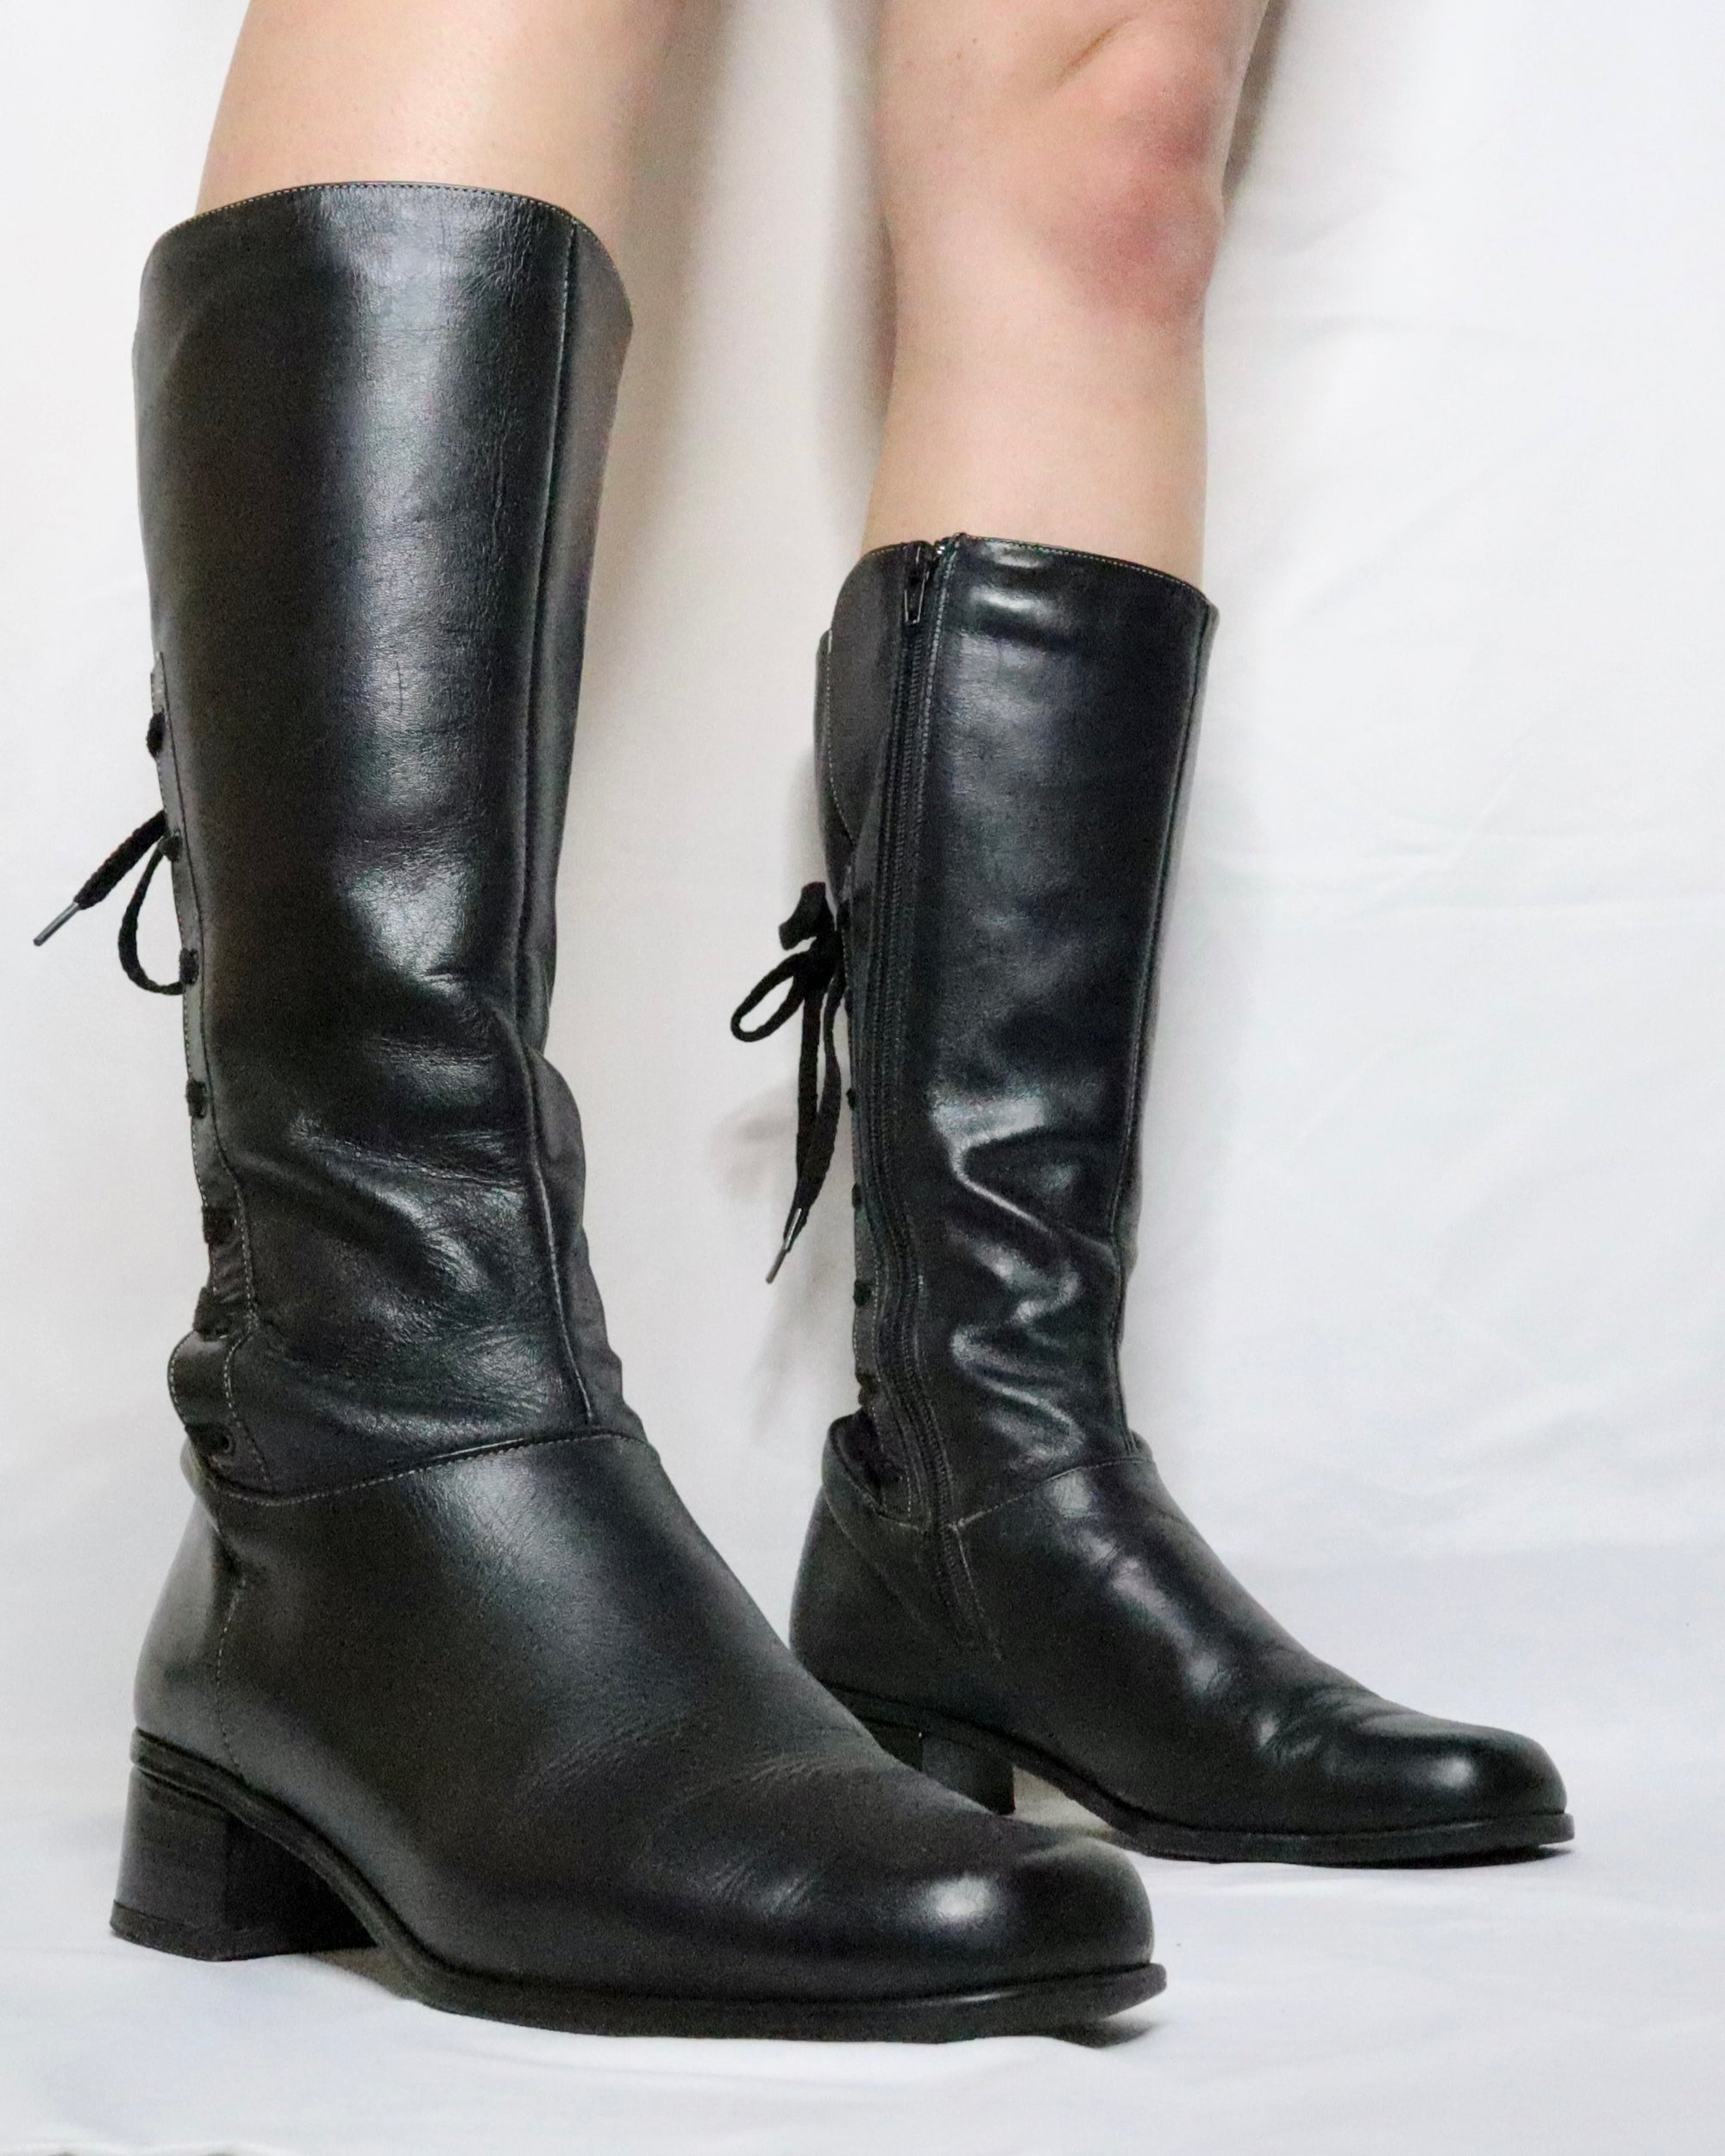 Black Leather Riding Boots (7-7.5 US) 